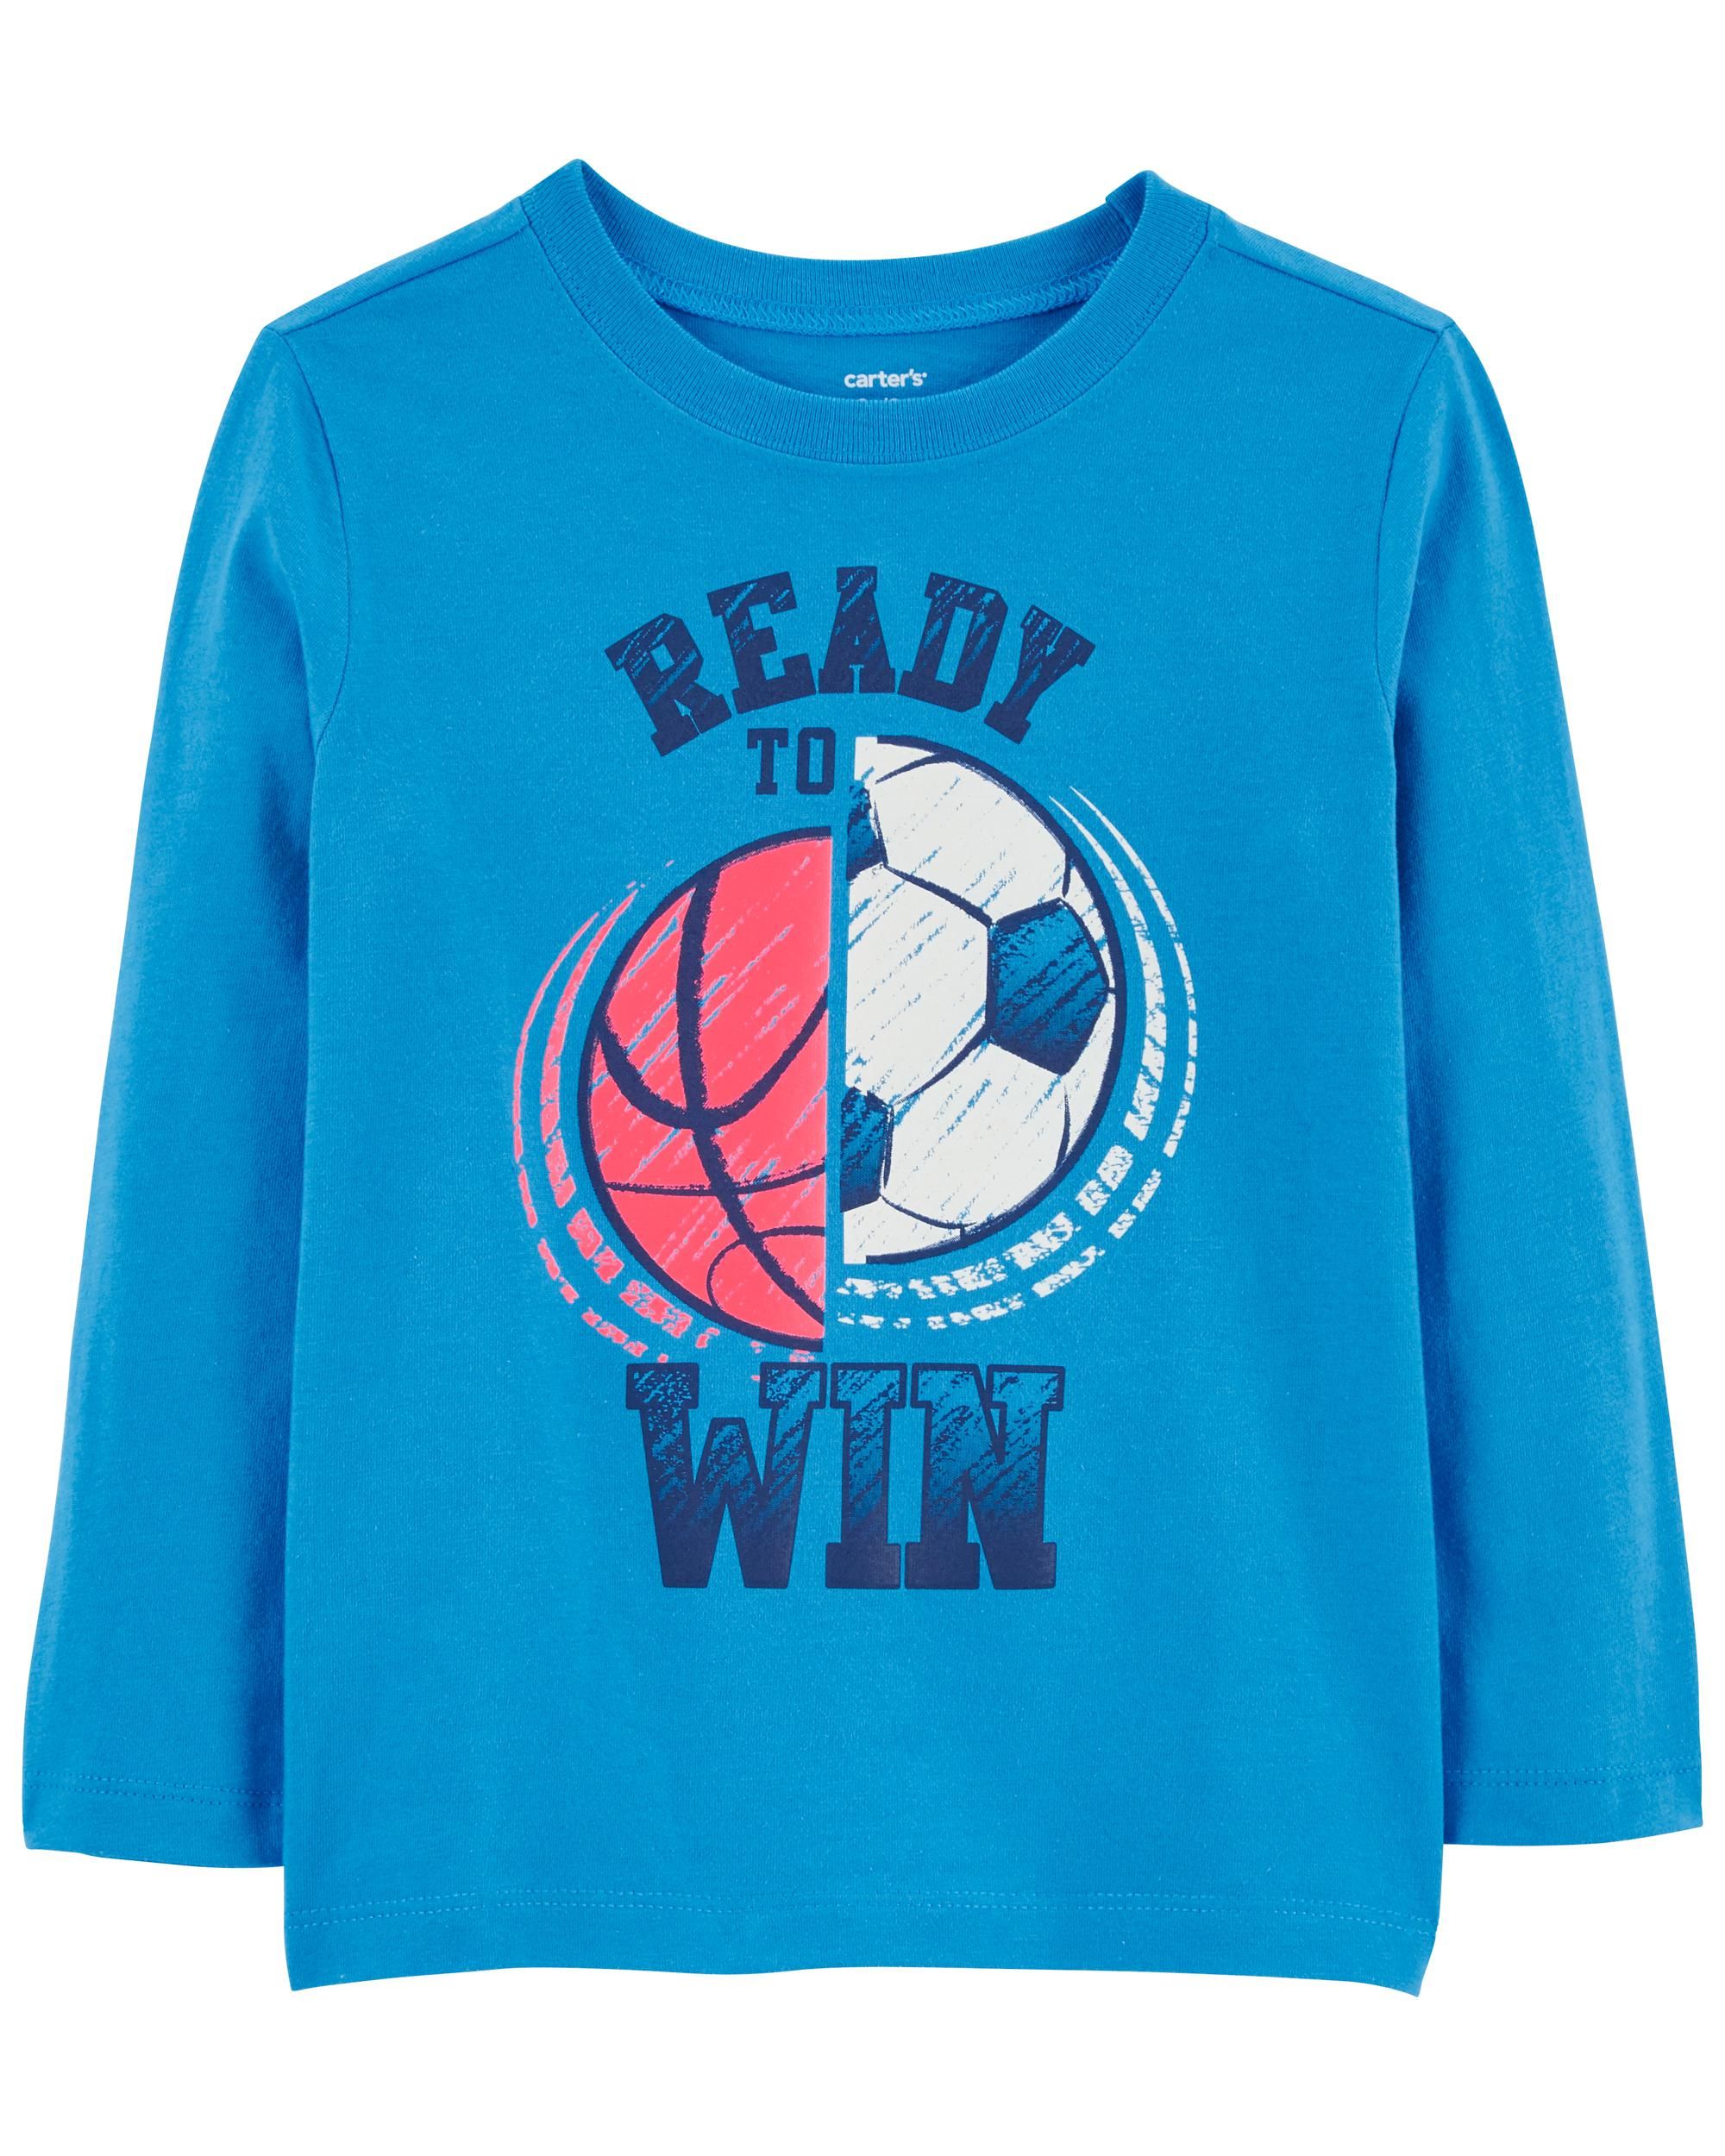 Toddler Ready To Win Sports Tee | Carter's